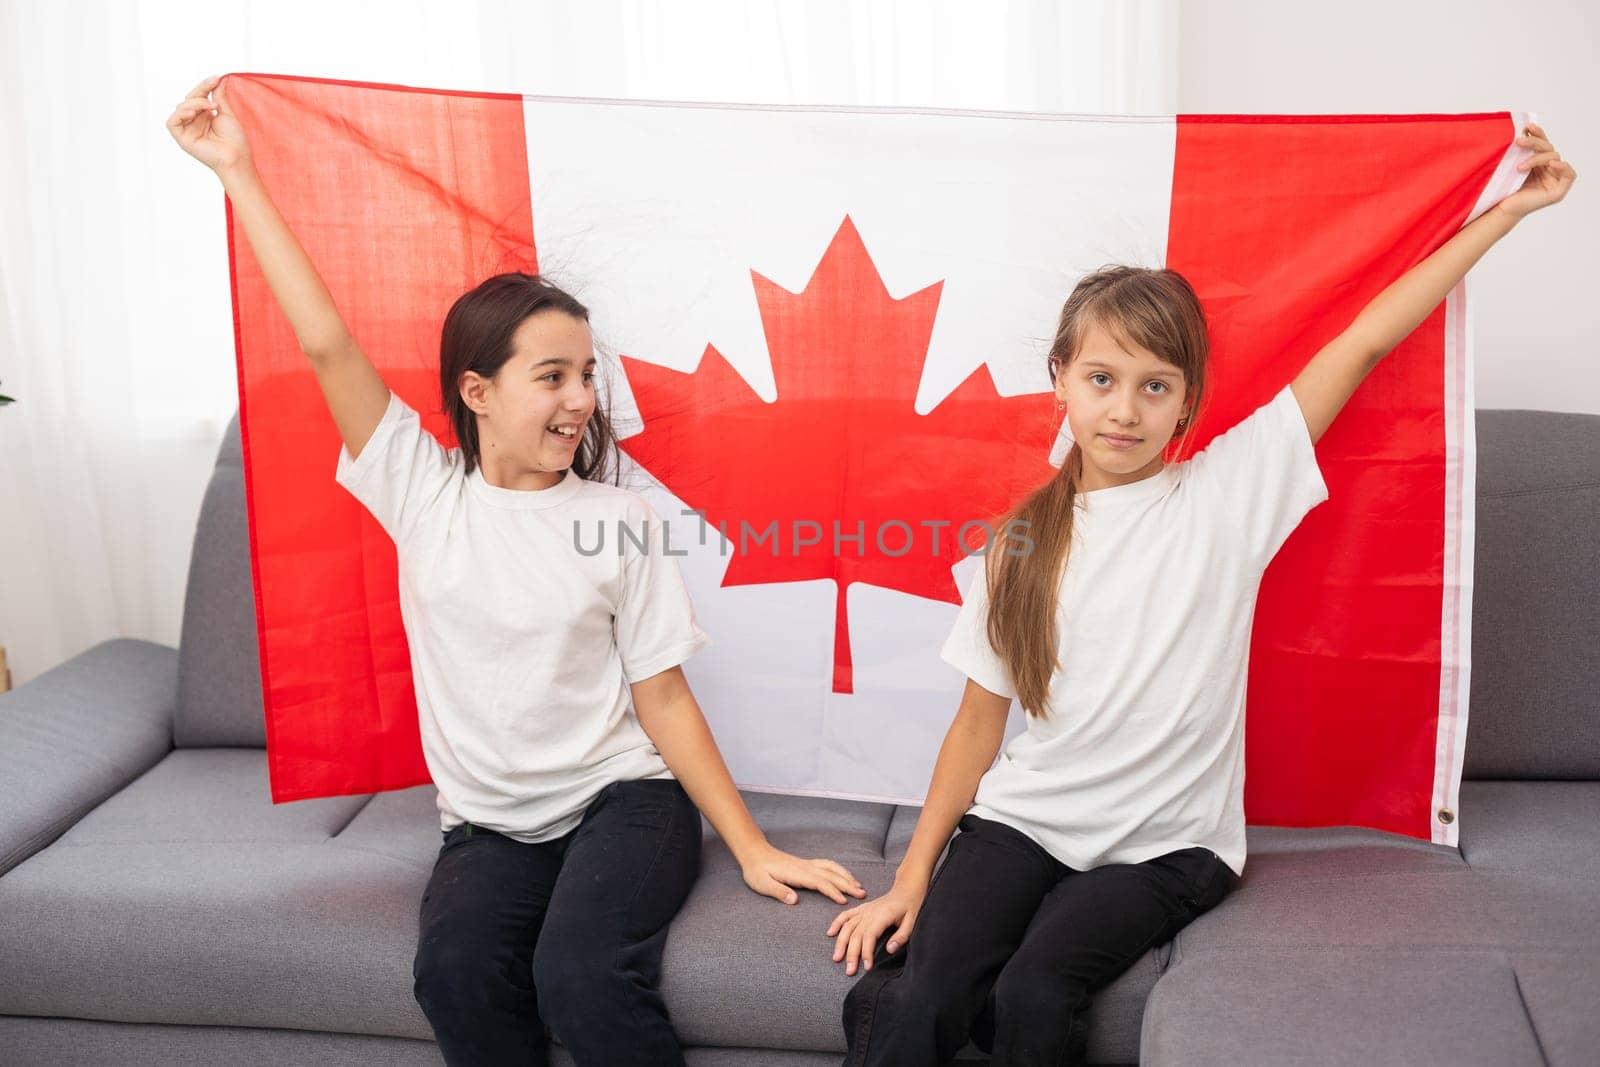 Happy Canada Day Celebration. Two girls with braided hair are at nature background with big Canada flag in their hands. Young Canadian caucasian kids 1st of July. High quality photo